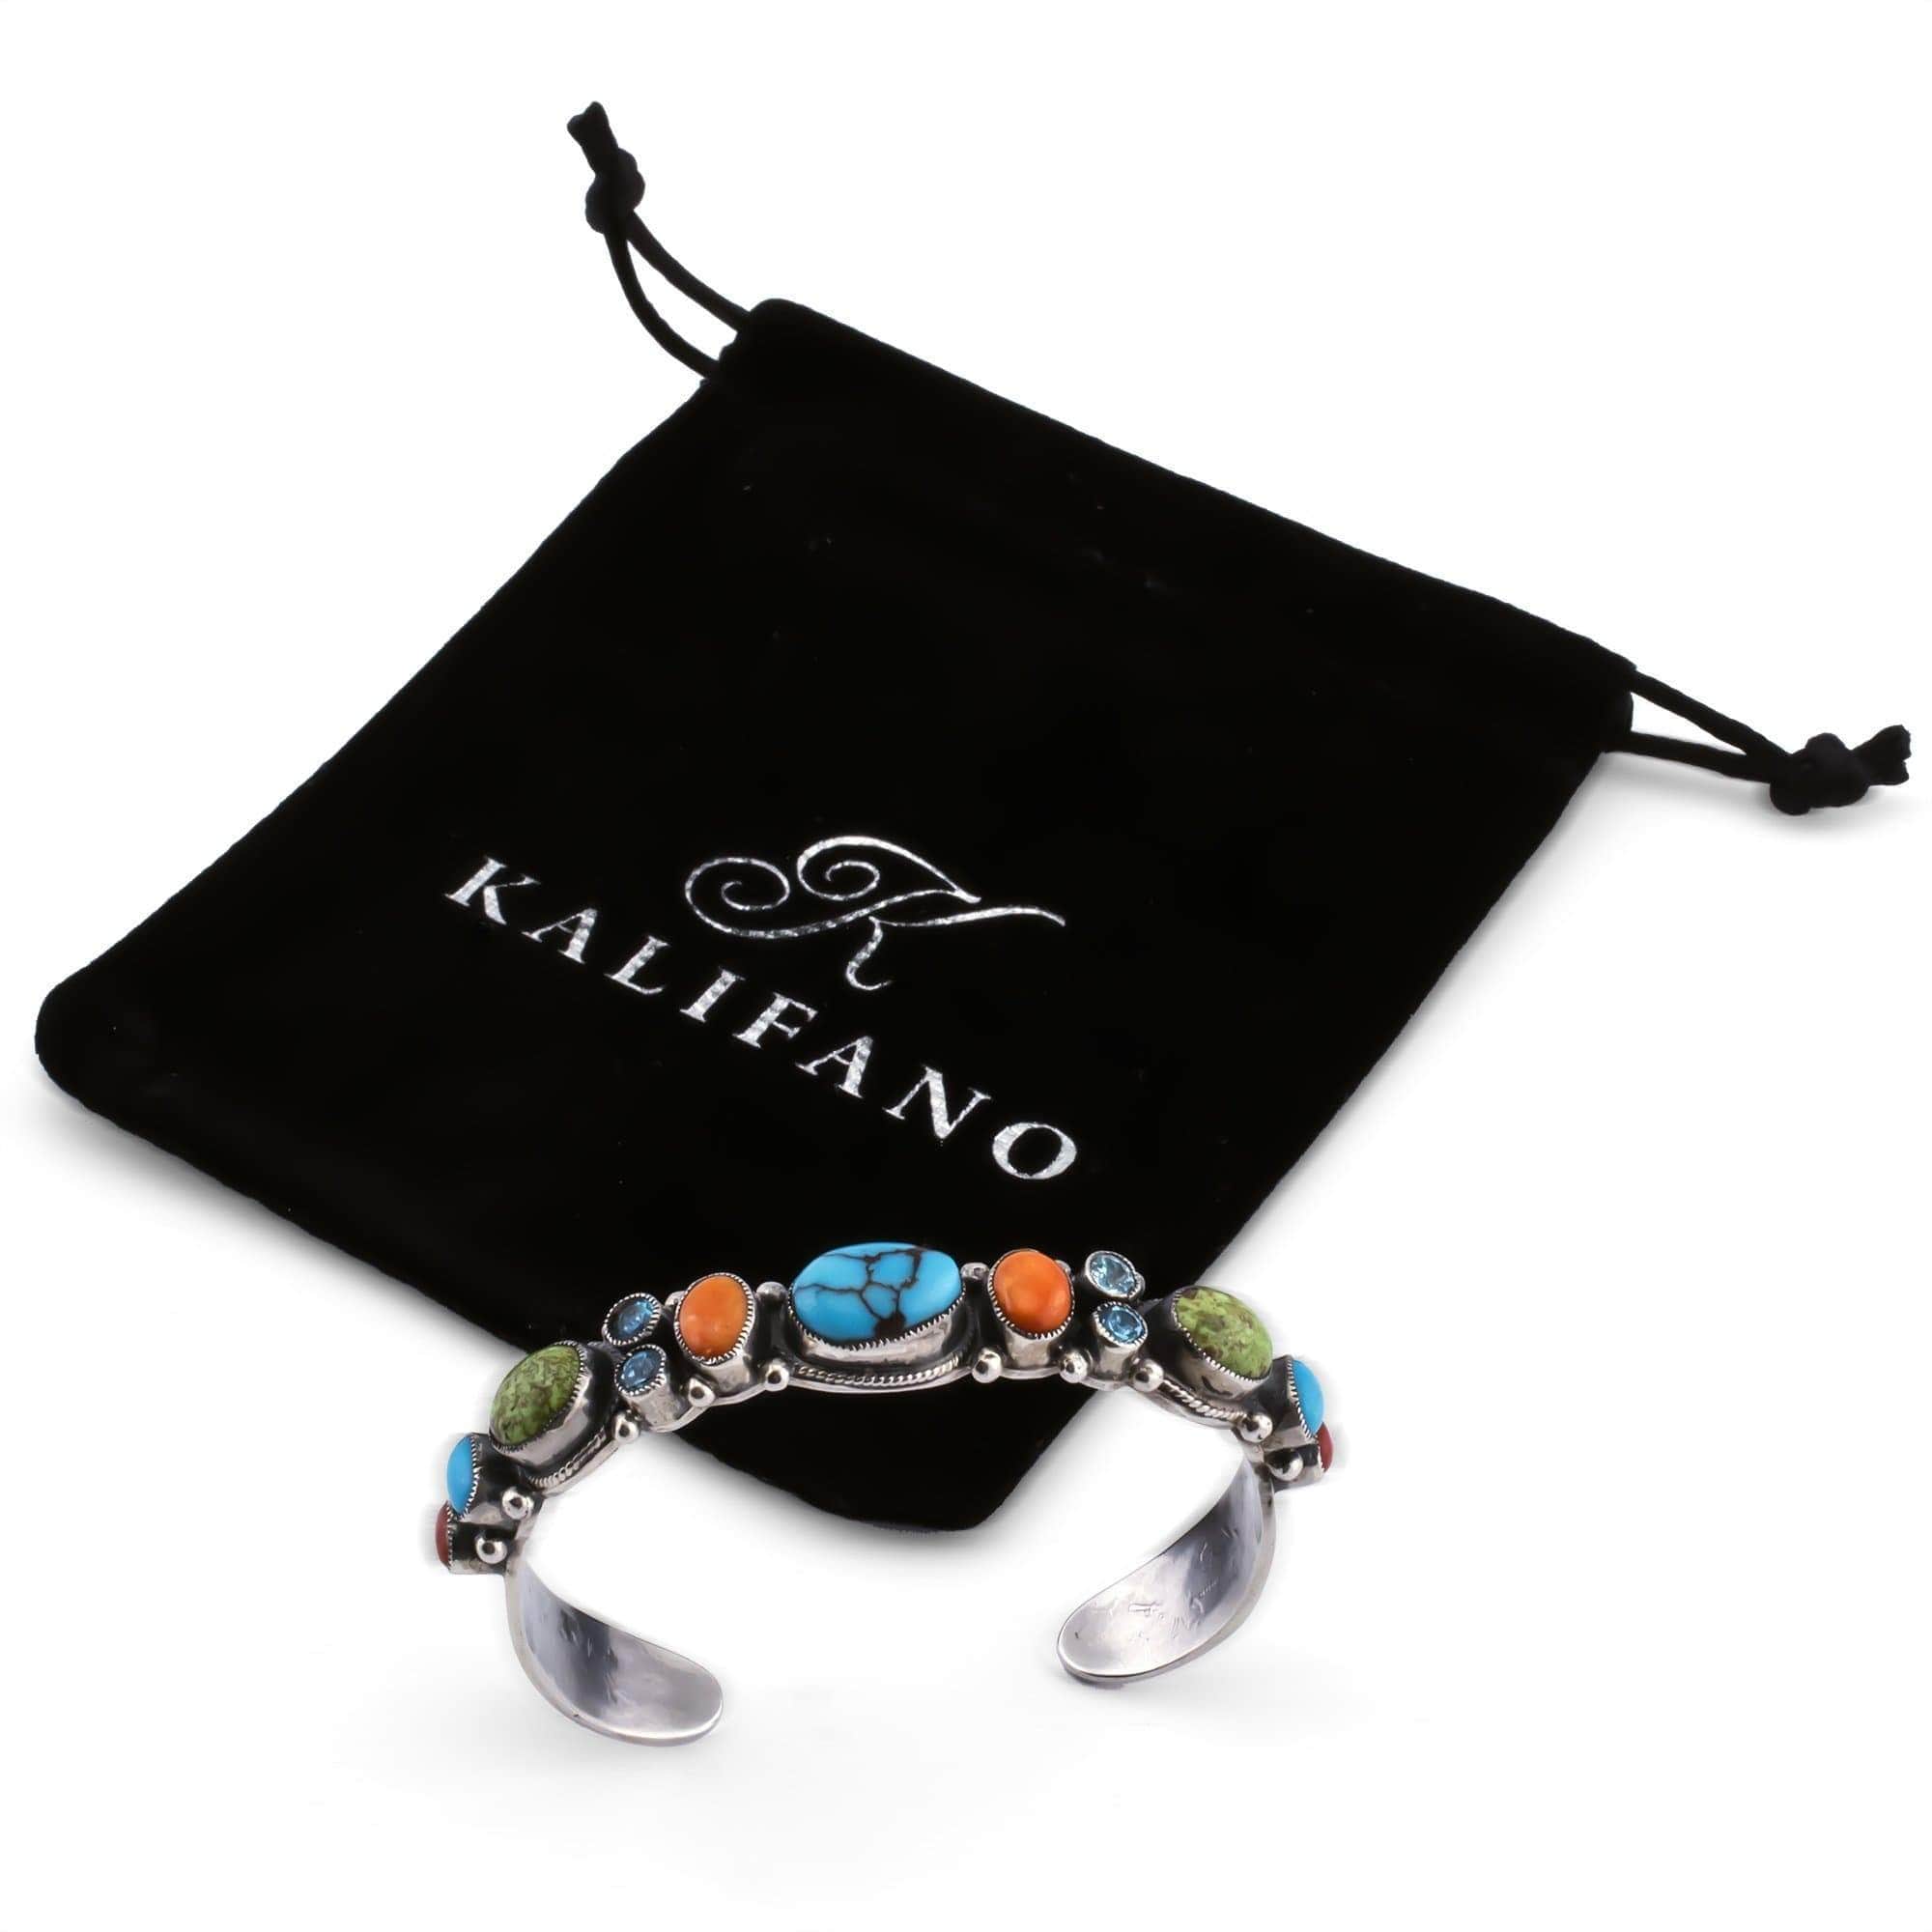 Kalifano Native American Jewelry Leo Feeney Sleeping Beauty Turquoise, Blue Topaz, Spiny Oyster Shell, and Gaspite USA Native American Made 925 Sterling Silver Cuff NAB1800.009